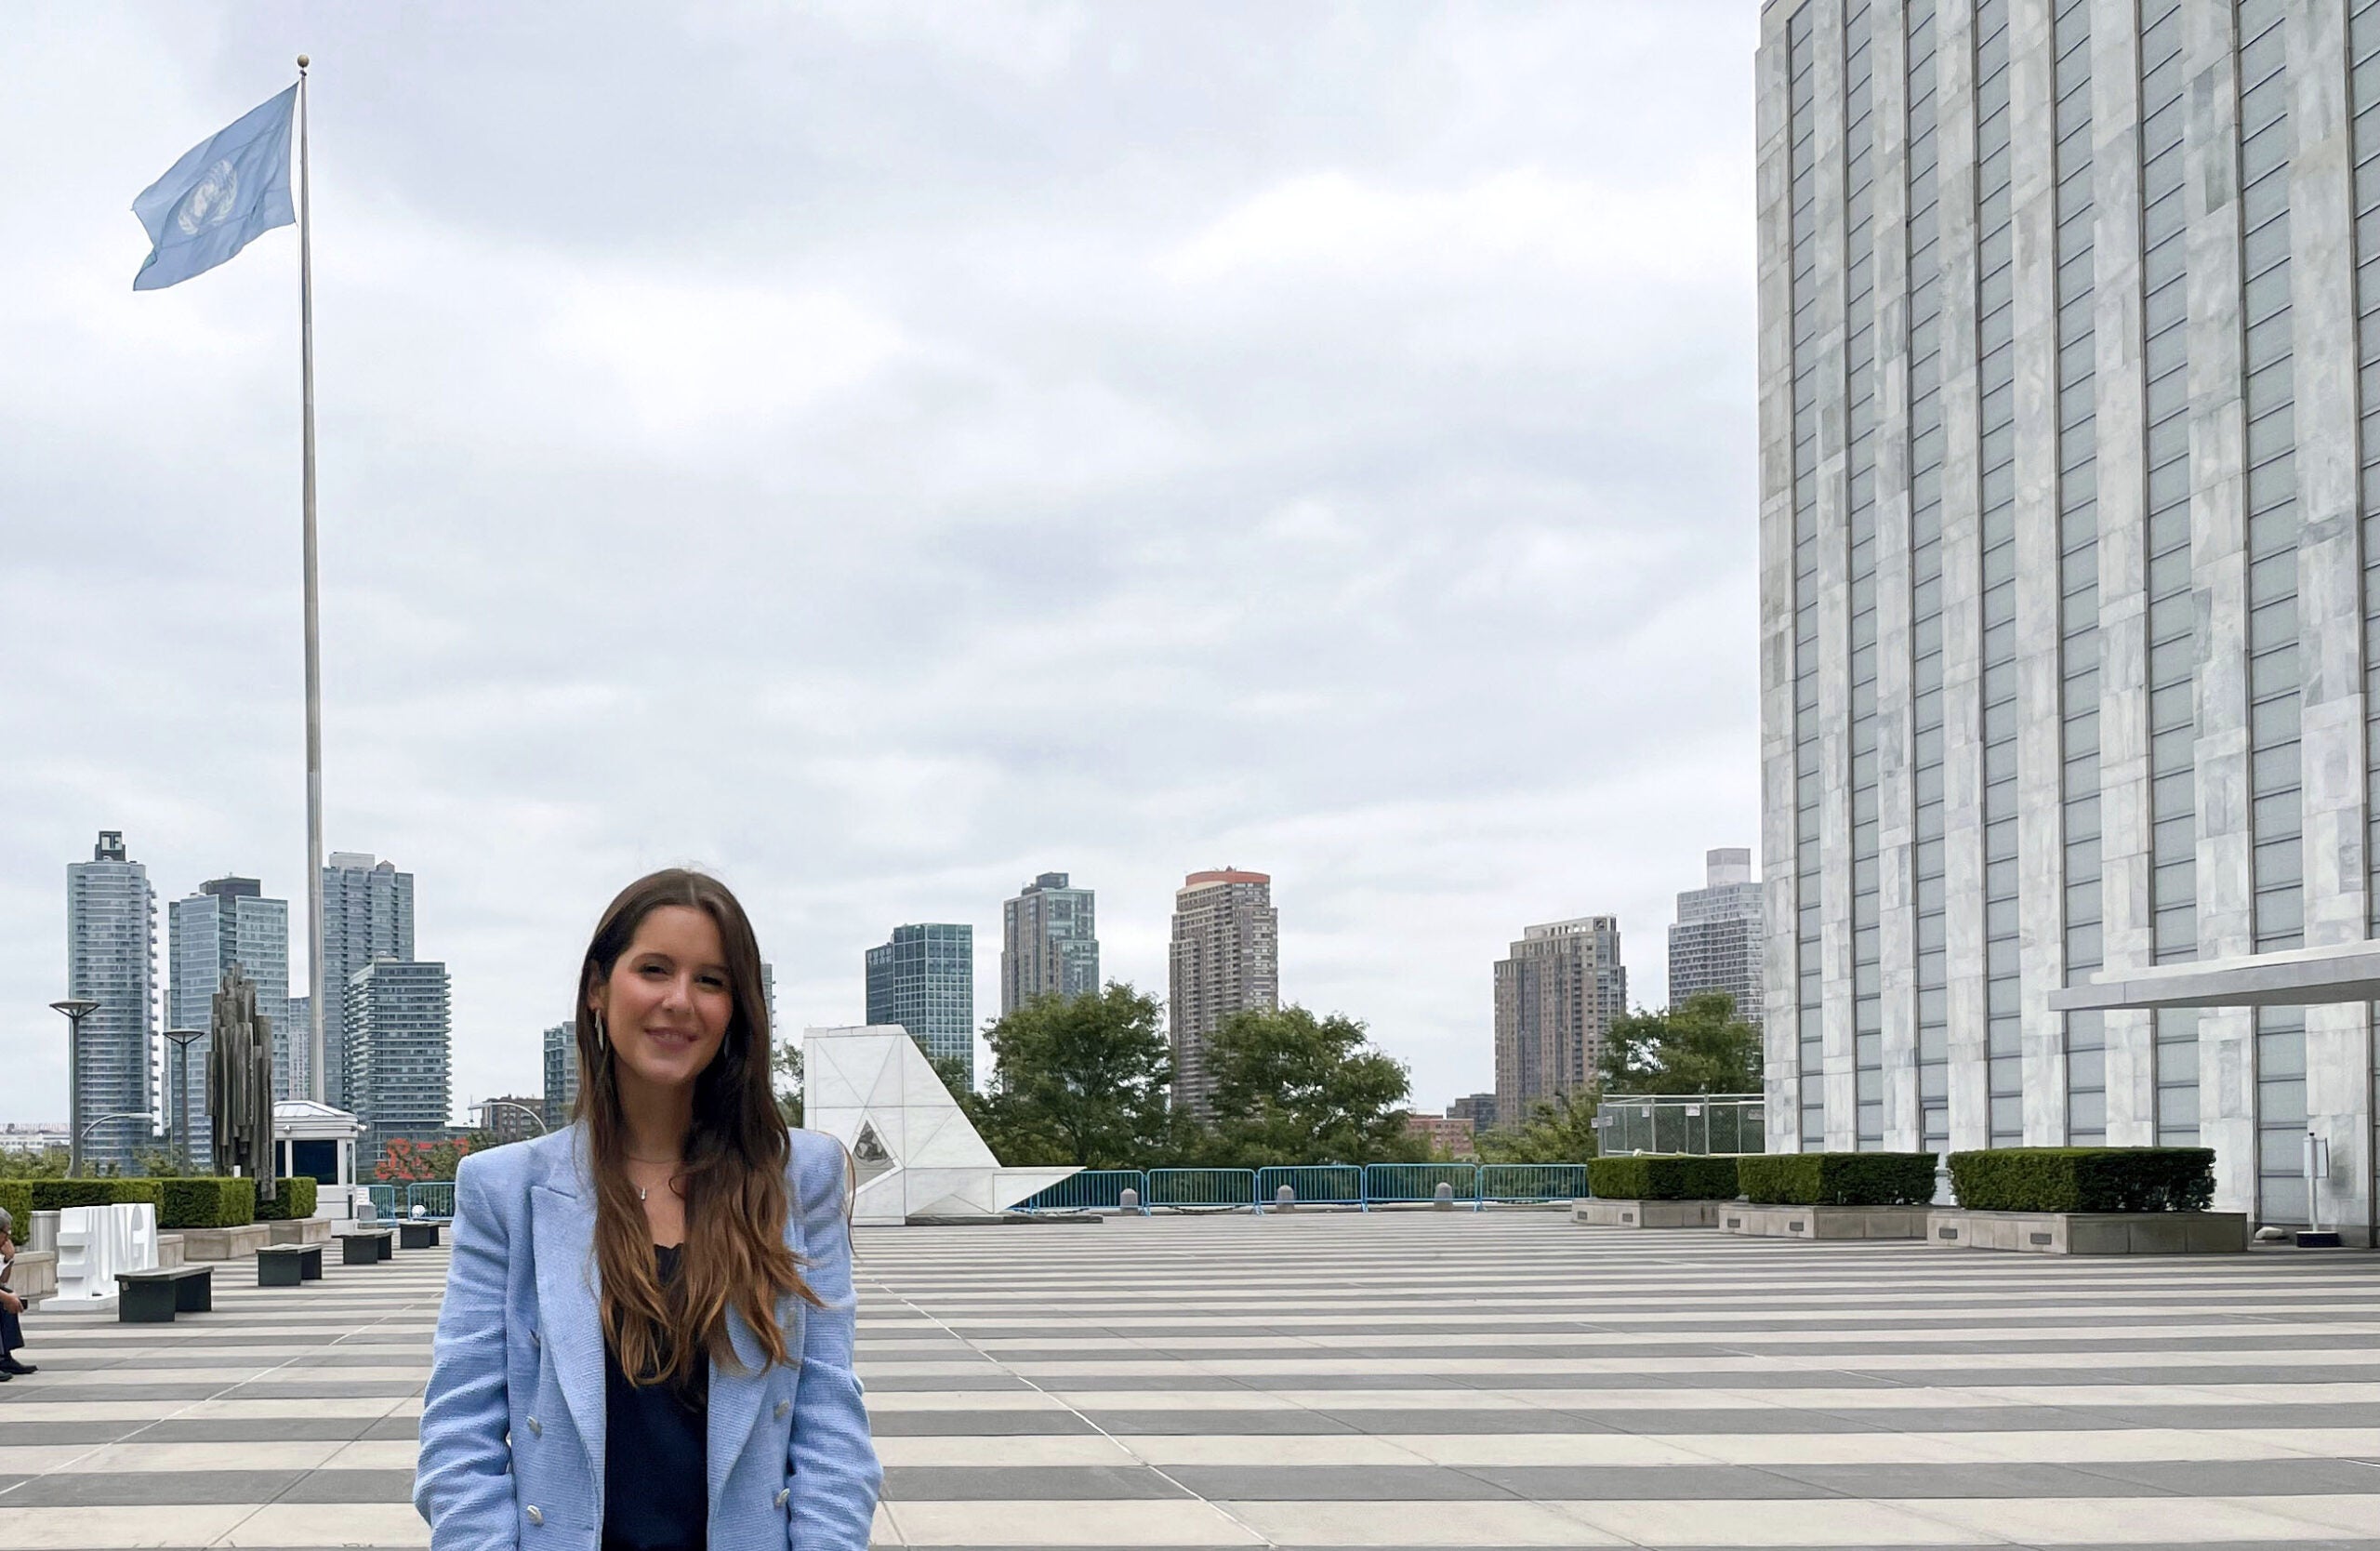 View of a young woman in a light blue jacket standing at United Nations Plaza and building entrance with the United Nations' flag visible.